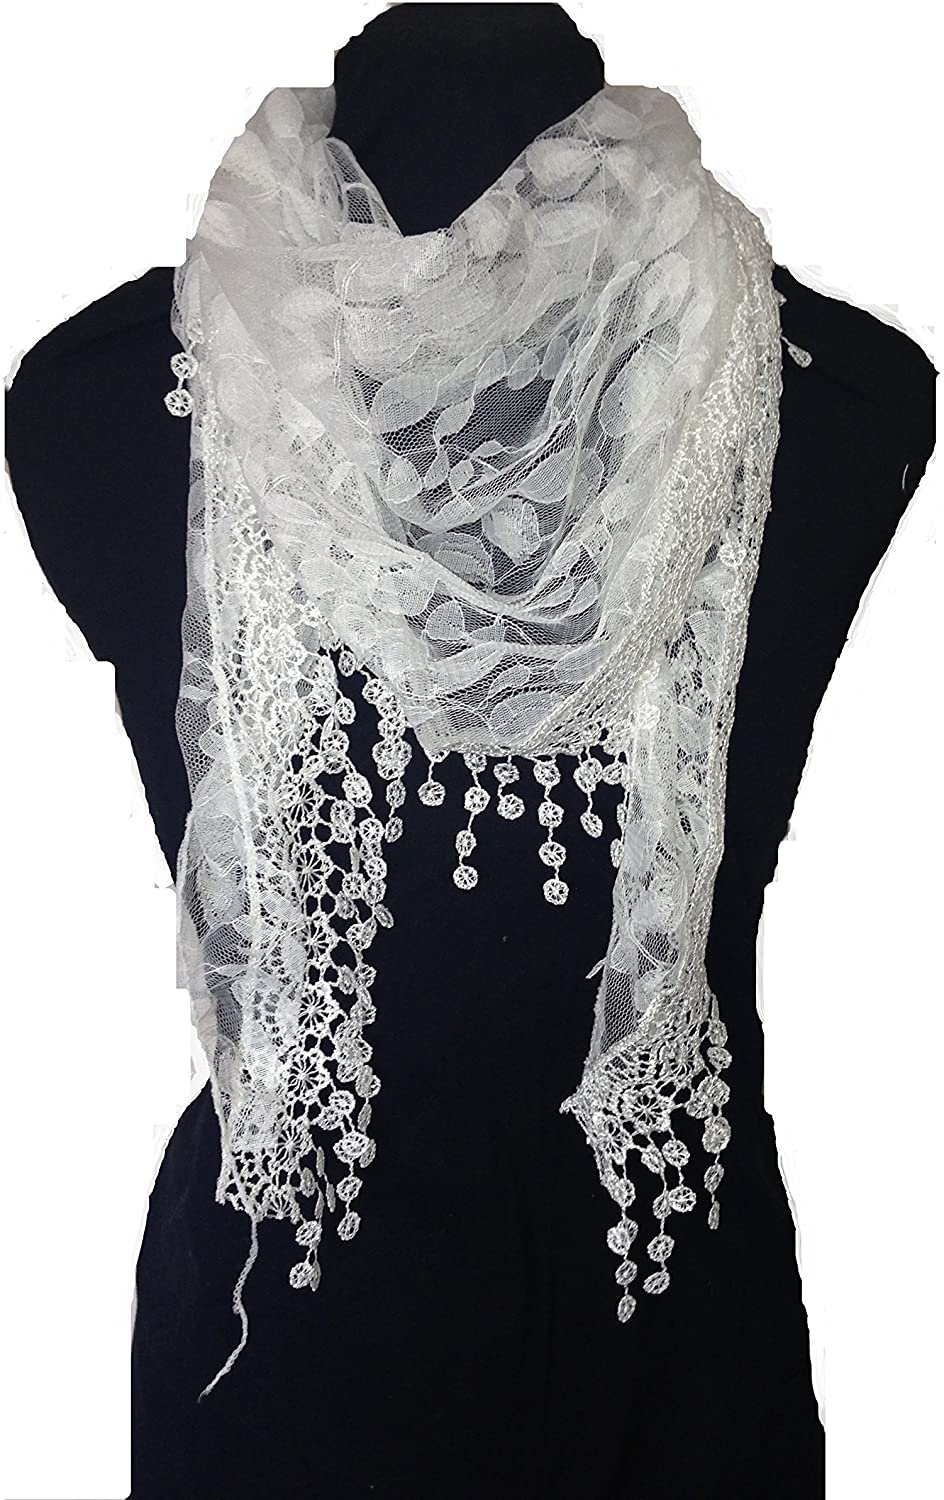 Pamper Yourself Now White Leaves Designs lace Triangle Scarf. a Lovely Fashion Item. Fantastic Gift